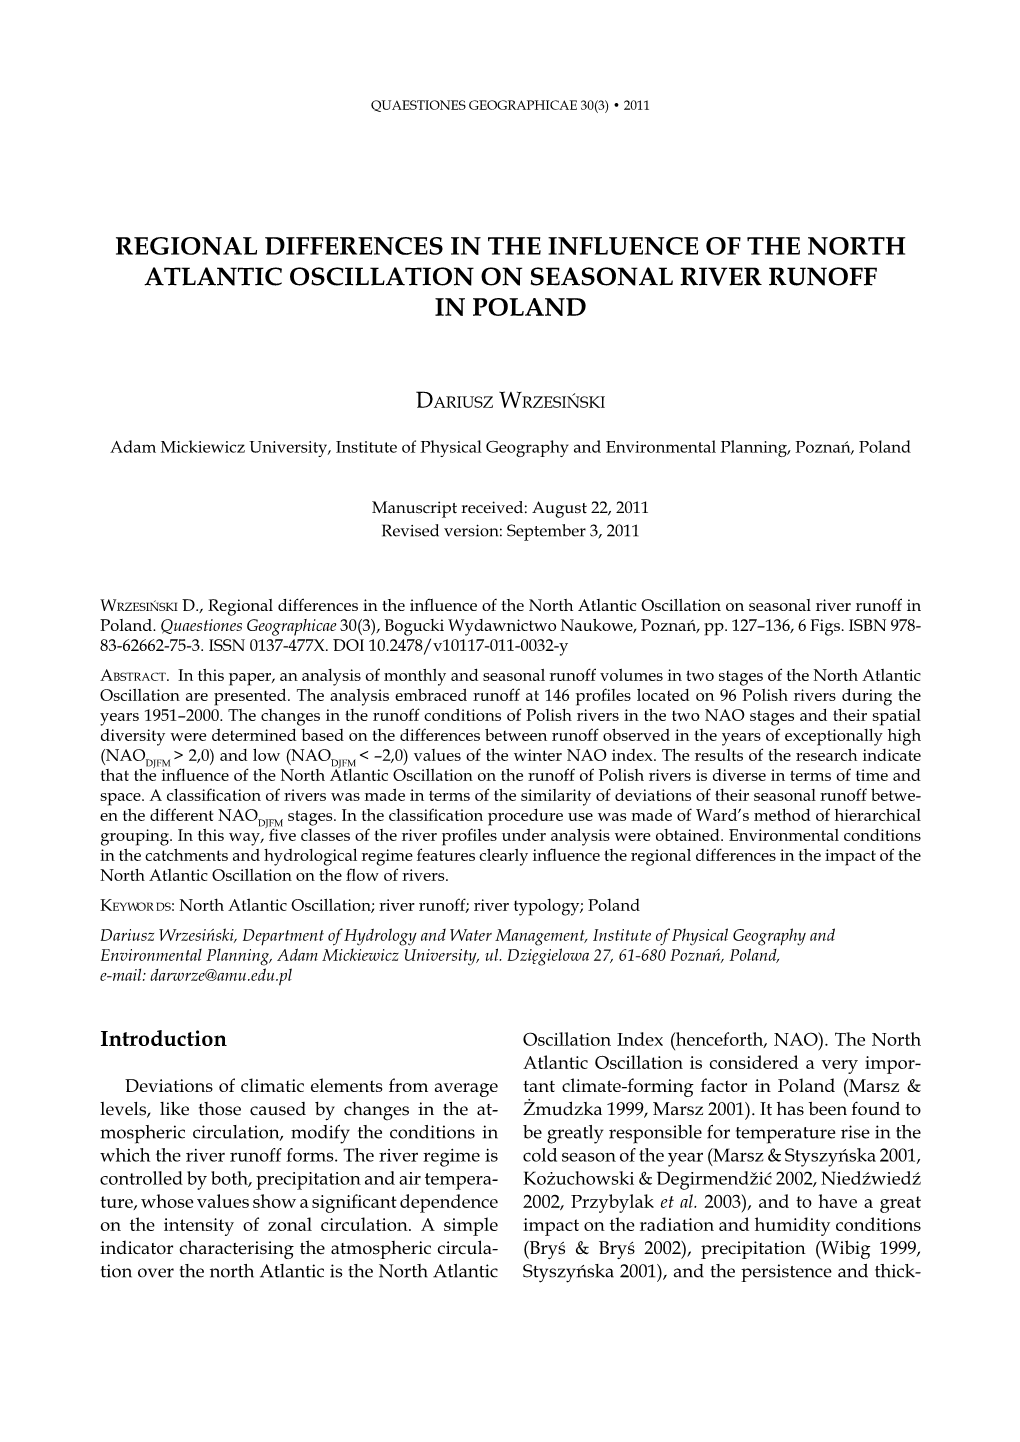 Regional Differences in the Influence of the North Atlantic Oscillation on Seasonal River Runoff in Poland